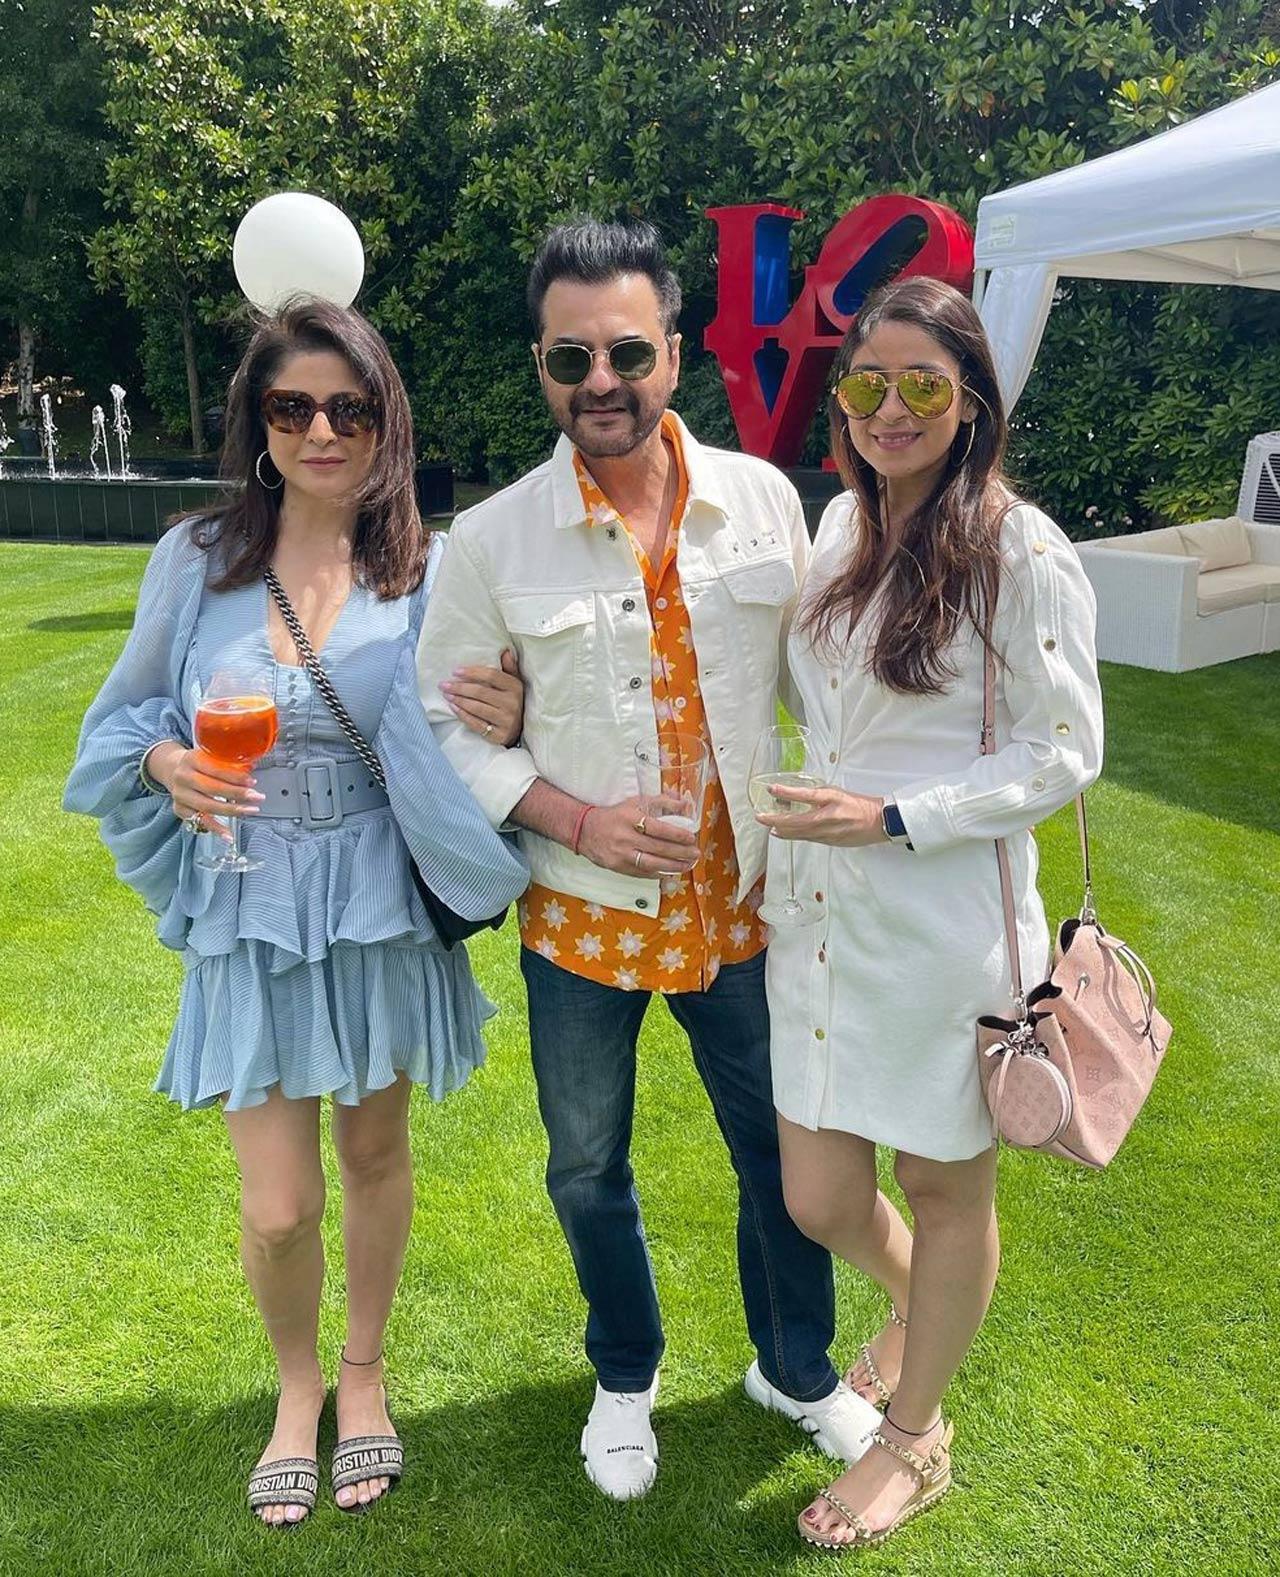 Now filming, Dharma Productions' 'Fabulous Lives of Bollywood Wives Season 2' is coming soon only on Netflix